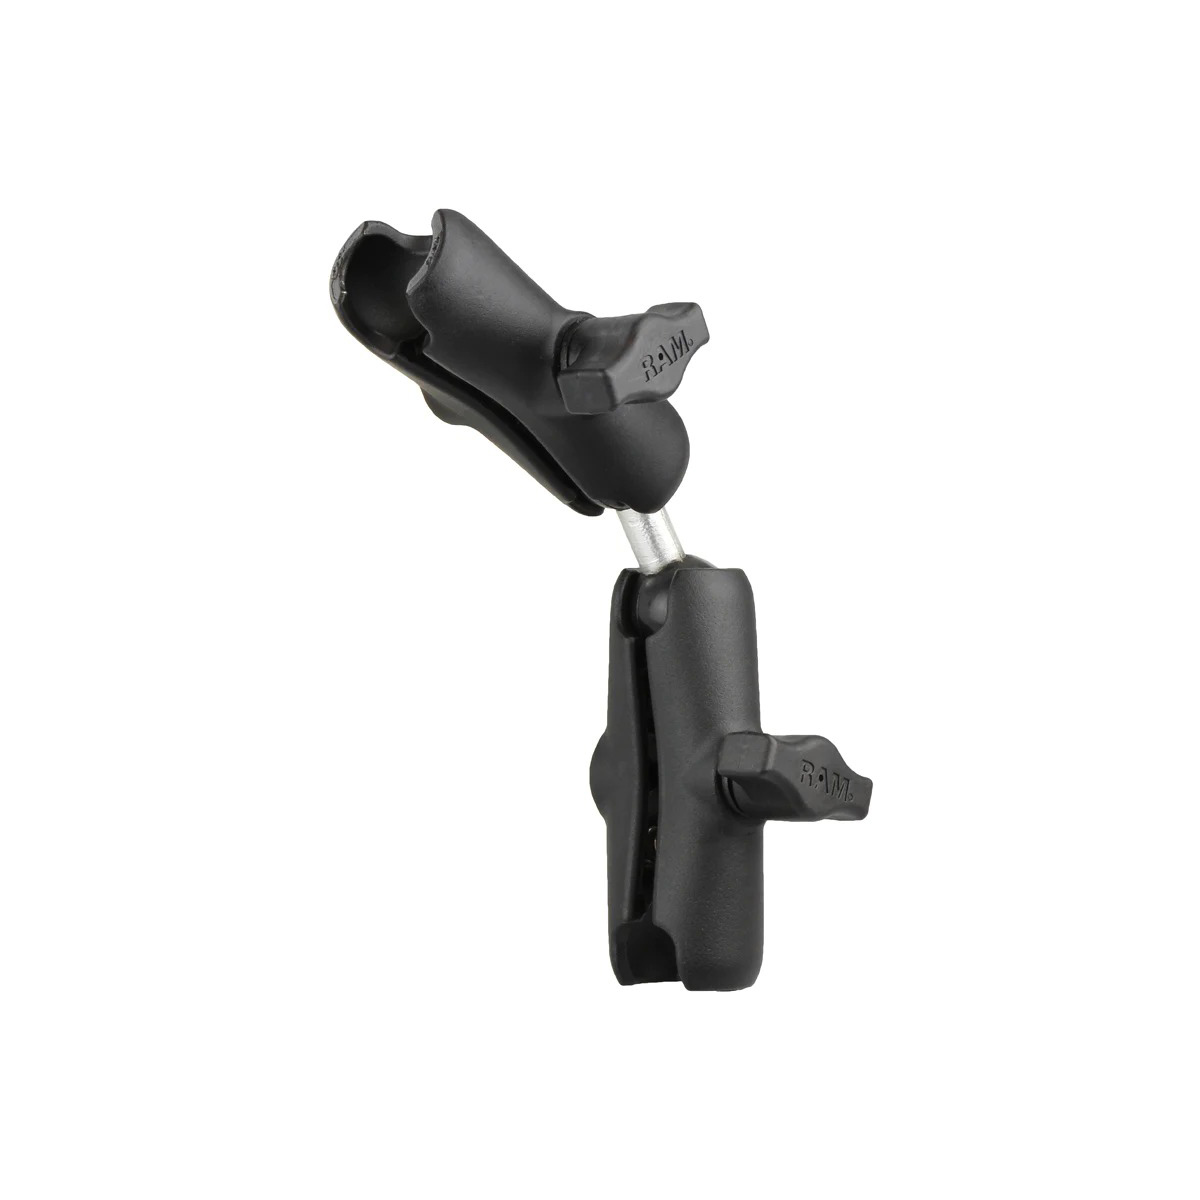 RAM-B-201-201: RAM Double Socket Arm with Dual Extension and Ball Adapter - B Size